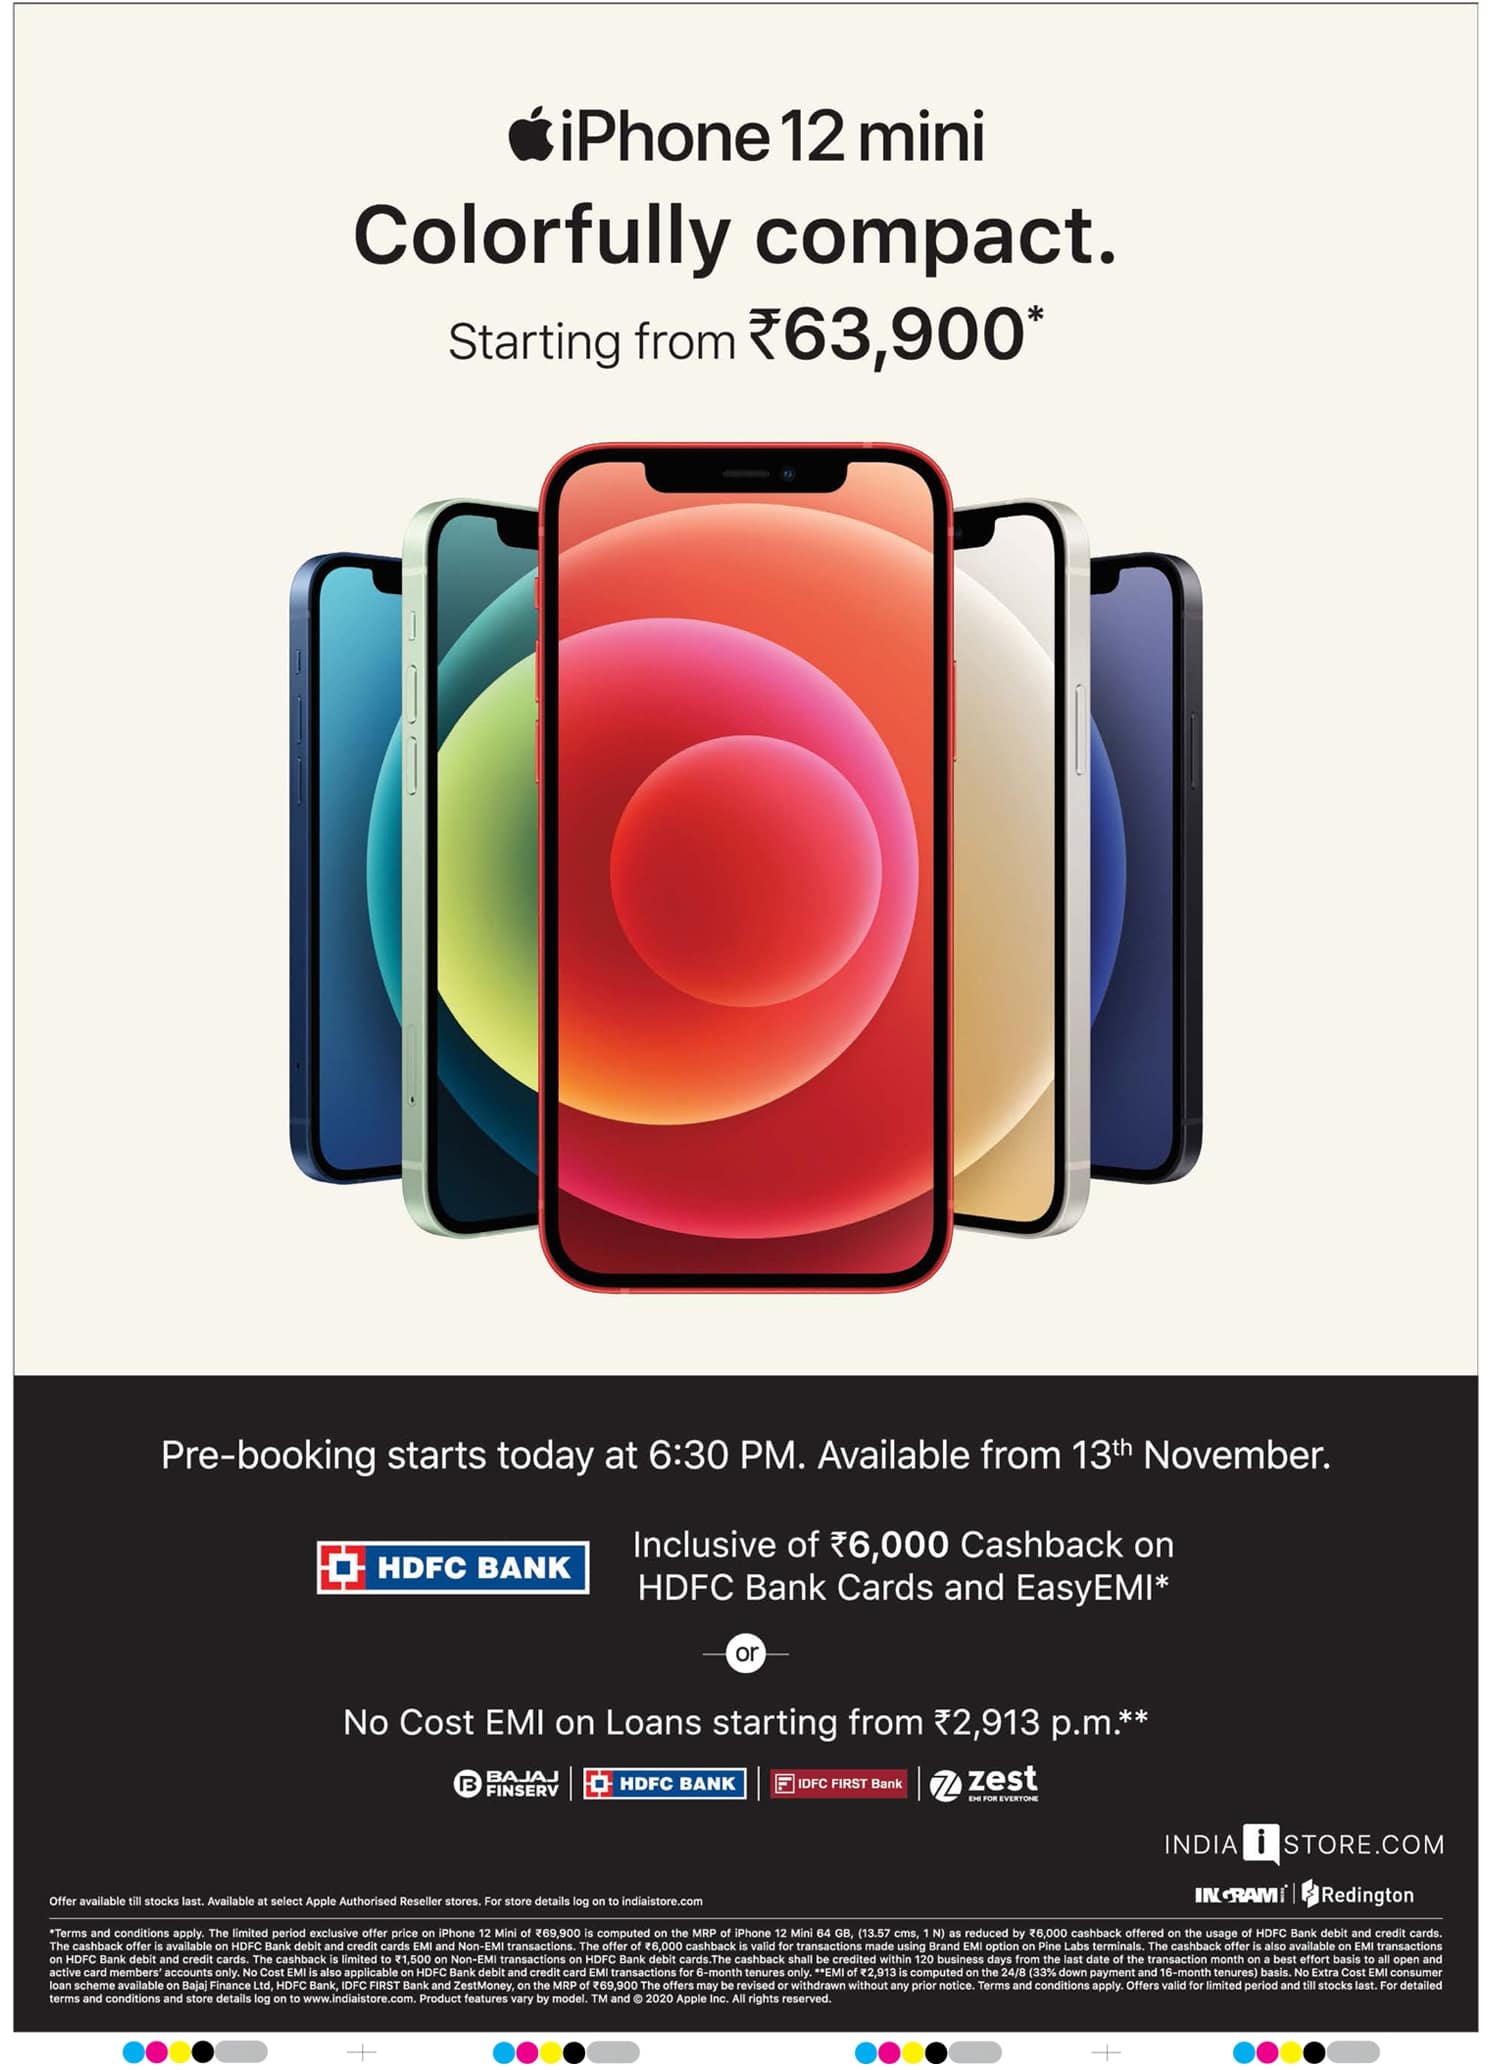 iphone-12-mini-colorfully-compact-starting-from-rs-63900-ad-deccan-chronicle-hyderabad-6-11-2020